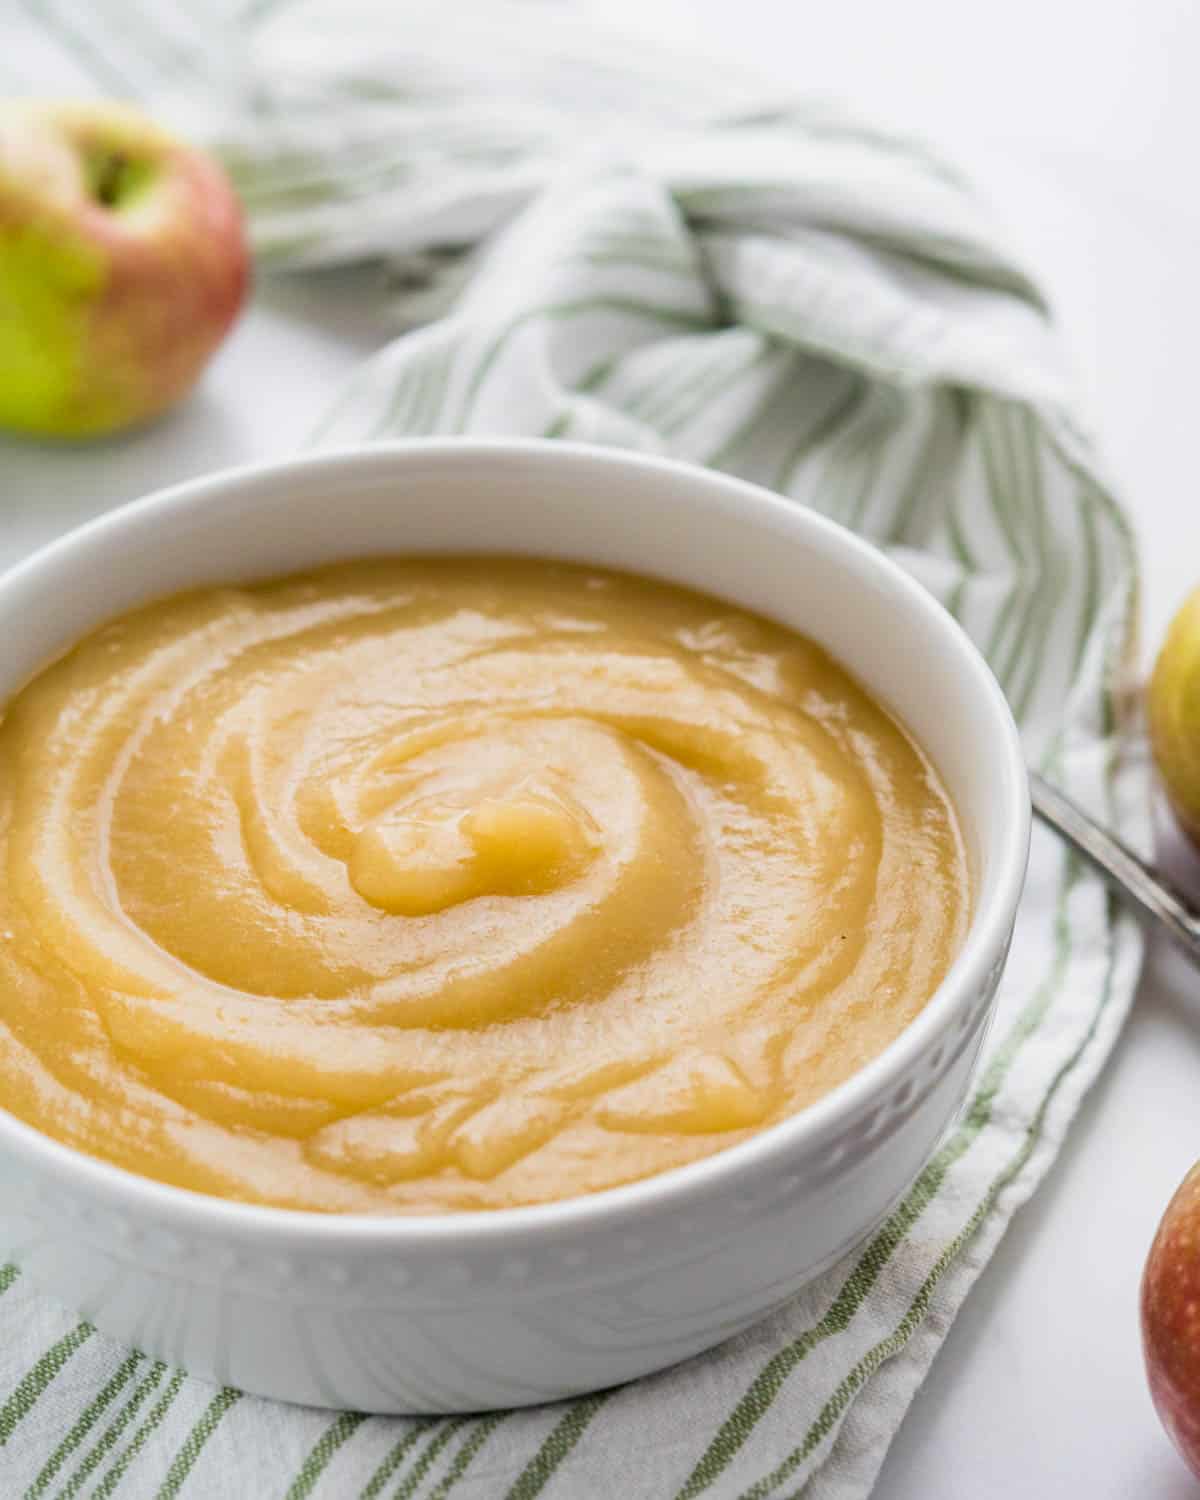 A bowl filled with homemade applesauce.